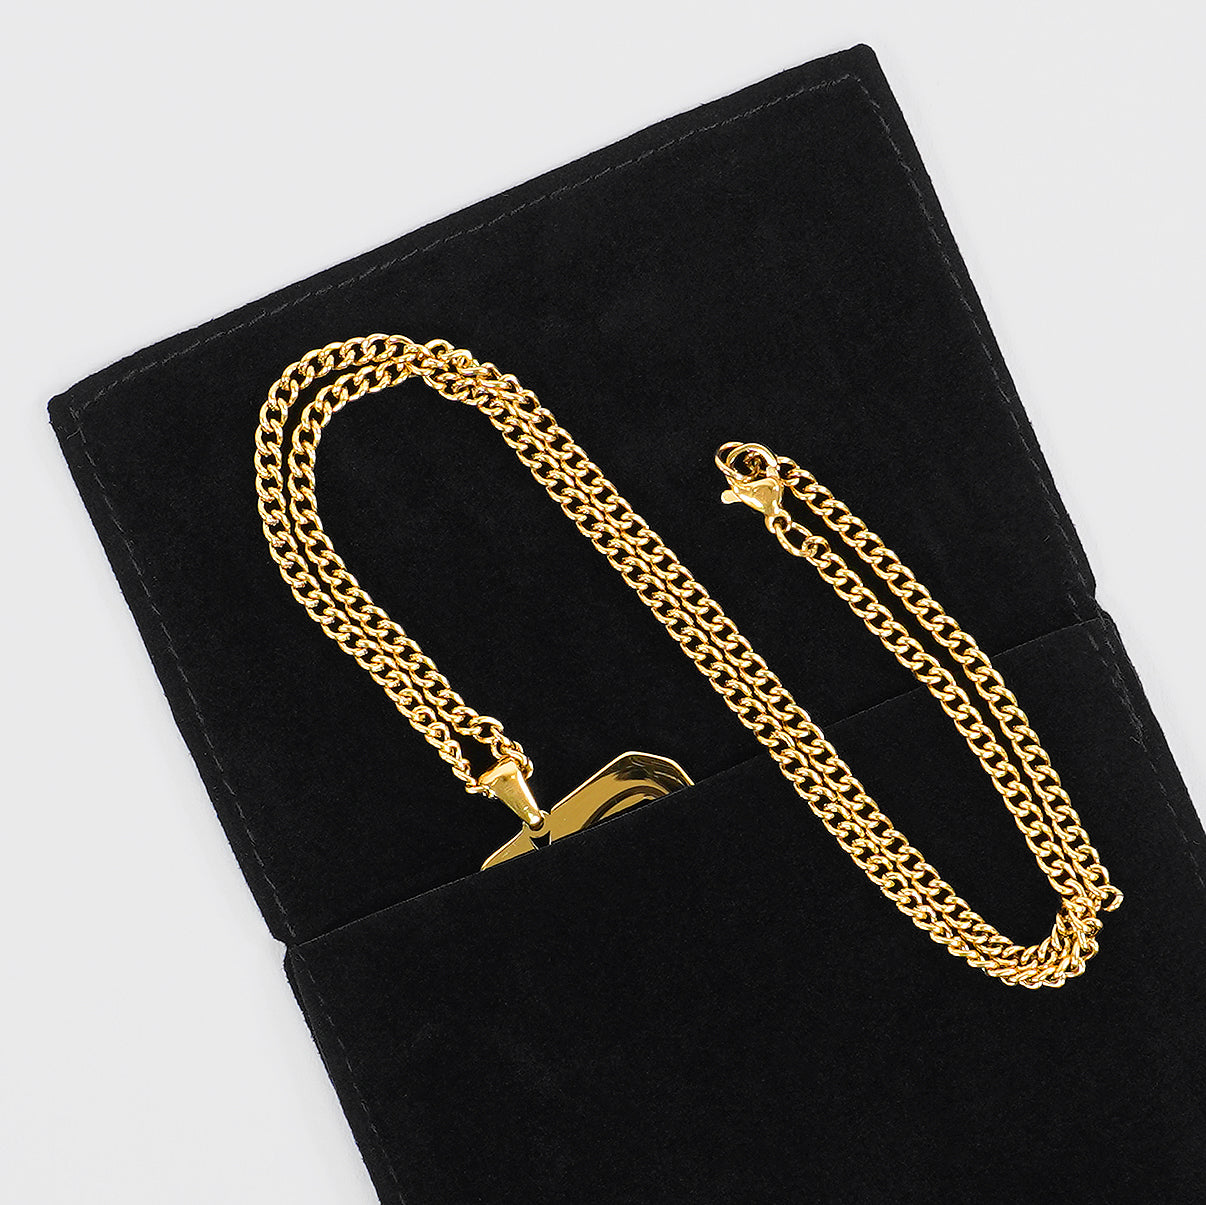 72 Number Pendant with Chain Necklace - Gold Plated Stainless Steel